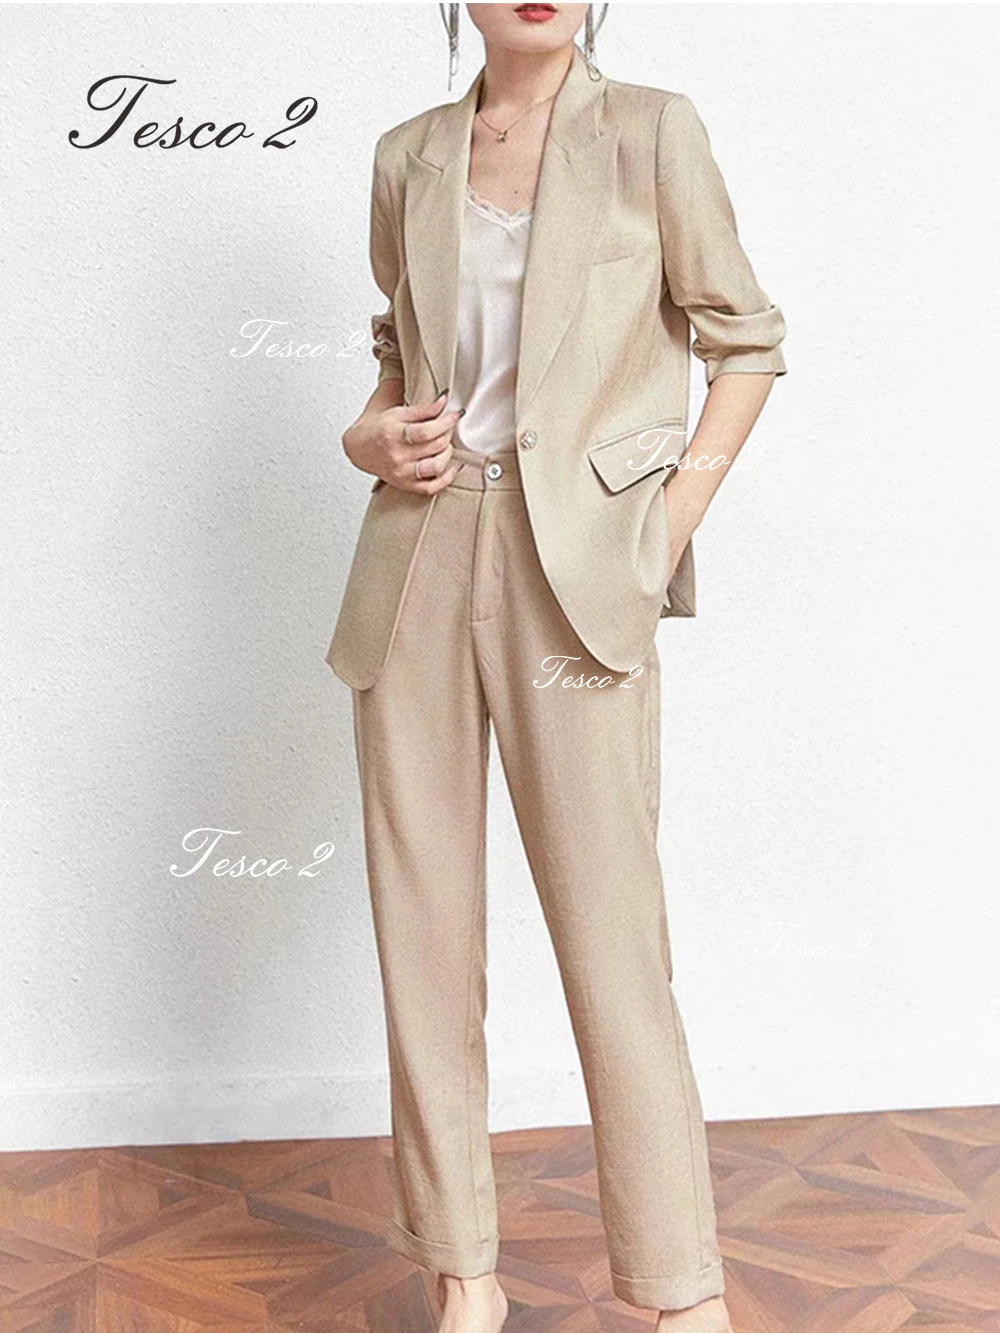 New Business Women's Office Uniform Pantsuit Business Office Bespoke For Chic And Elegant Woman Set For Birthday Party Suit